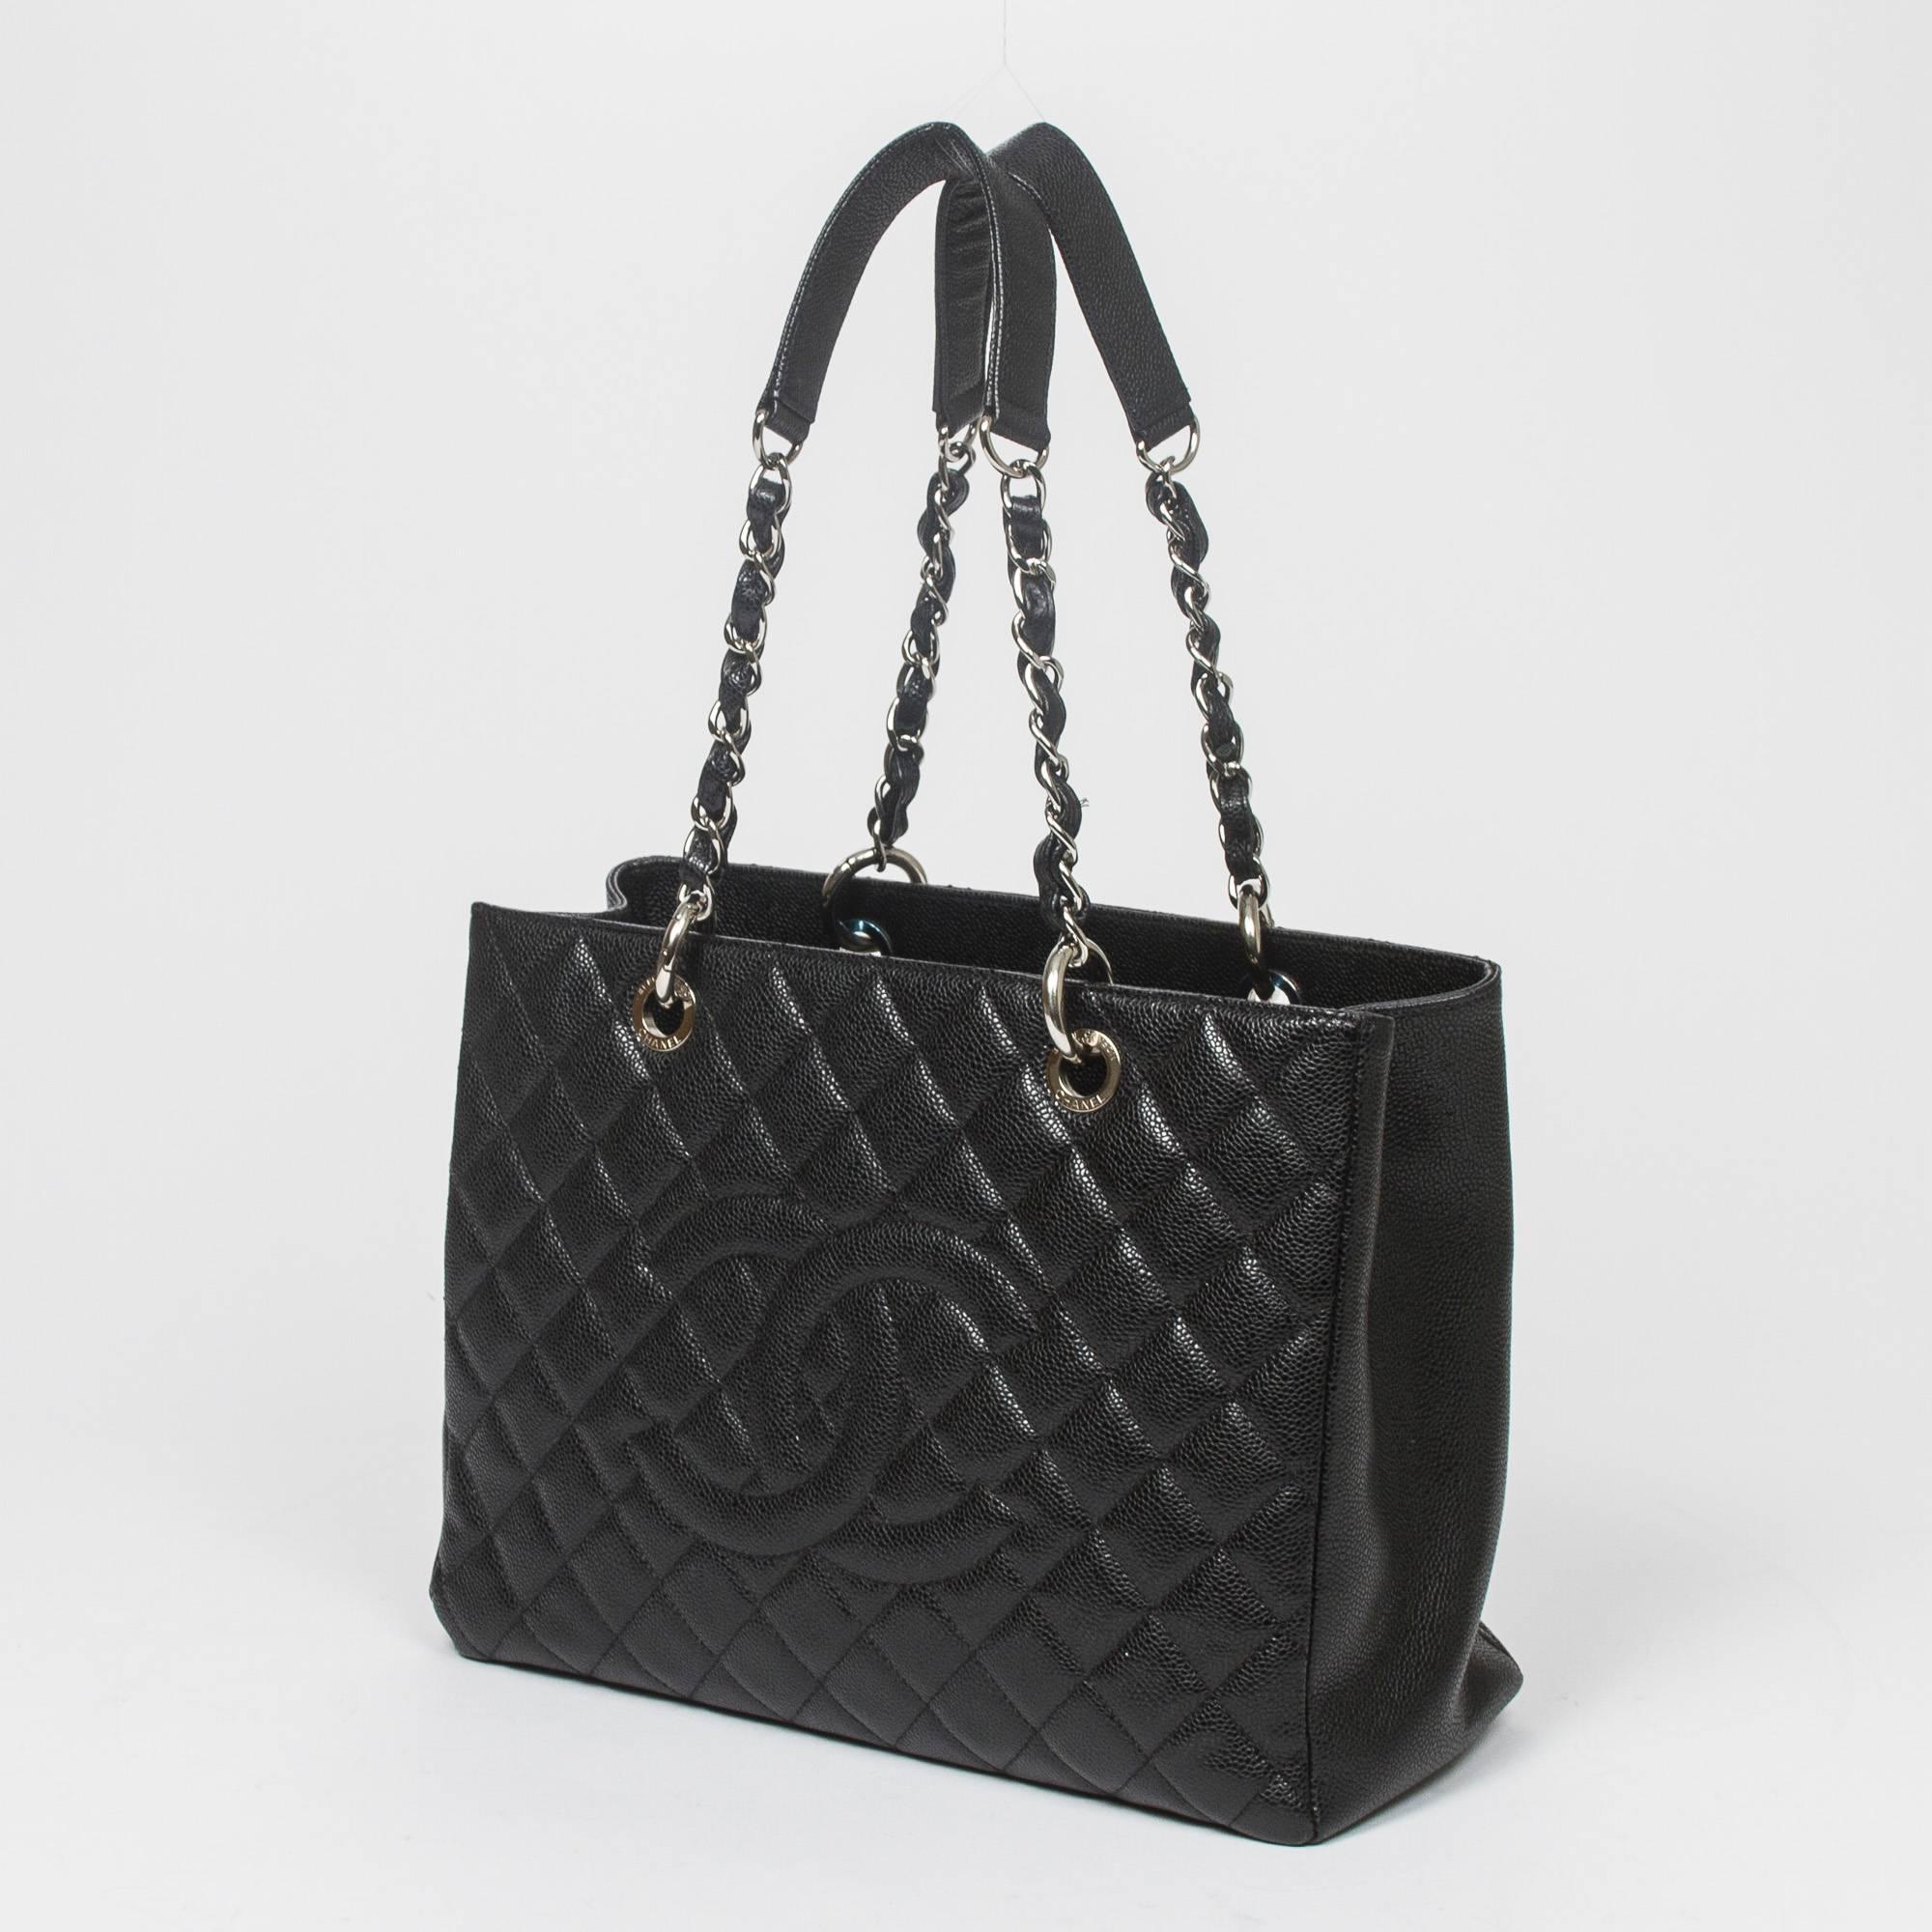 Grand Shopping Tote in black quilted caviar leather with chain and leather straps, silver tone hardware. Back slip pocket. Black satin lined interior with one zipped middle compartment, 2 slip pockets and one zip pocket. Silver tone heat stamp